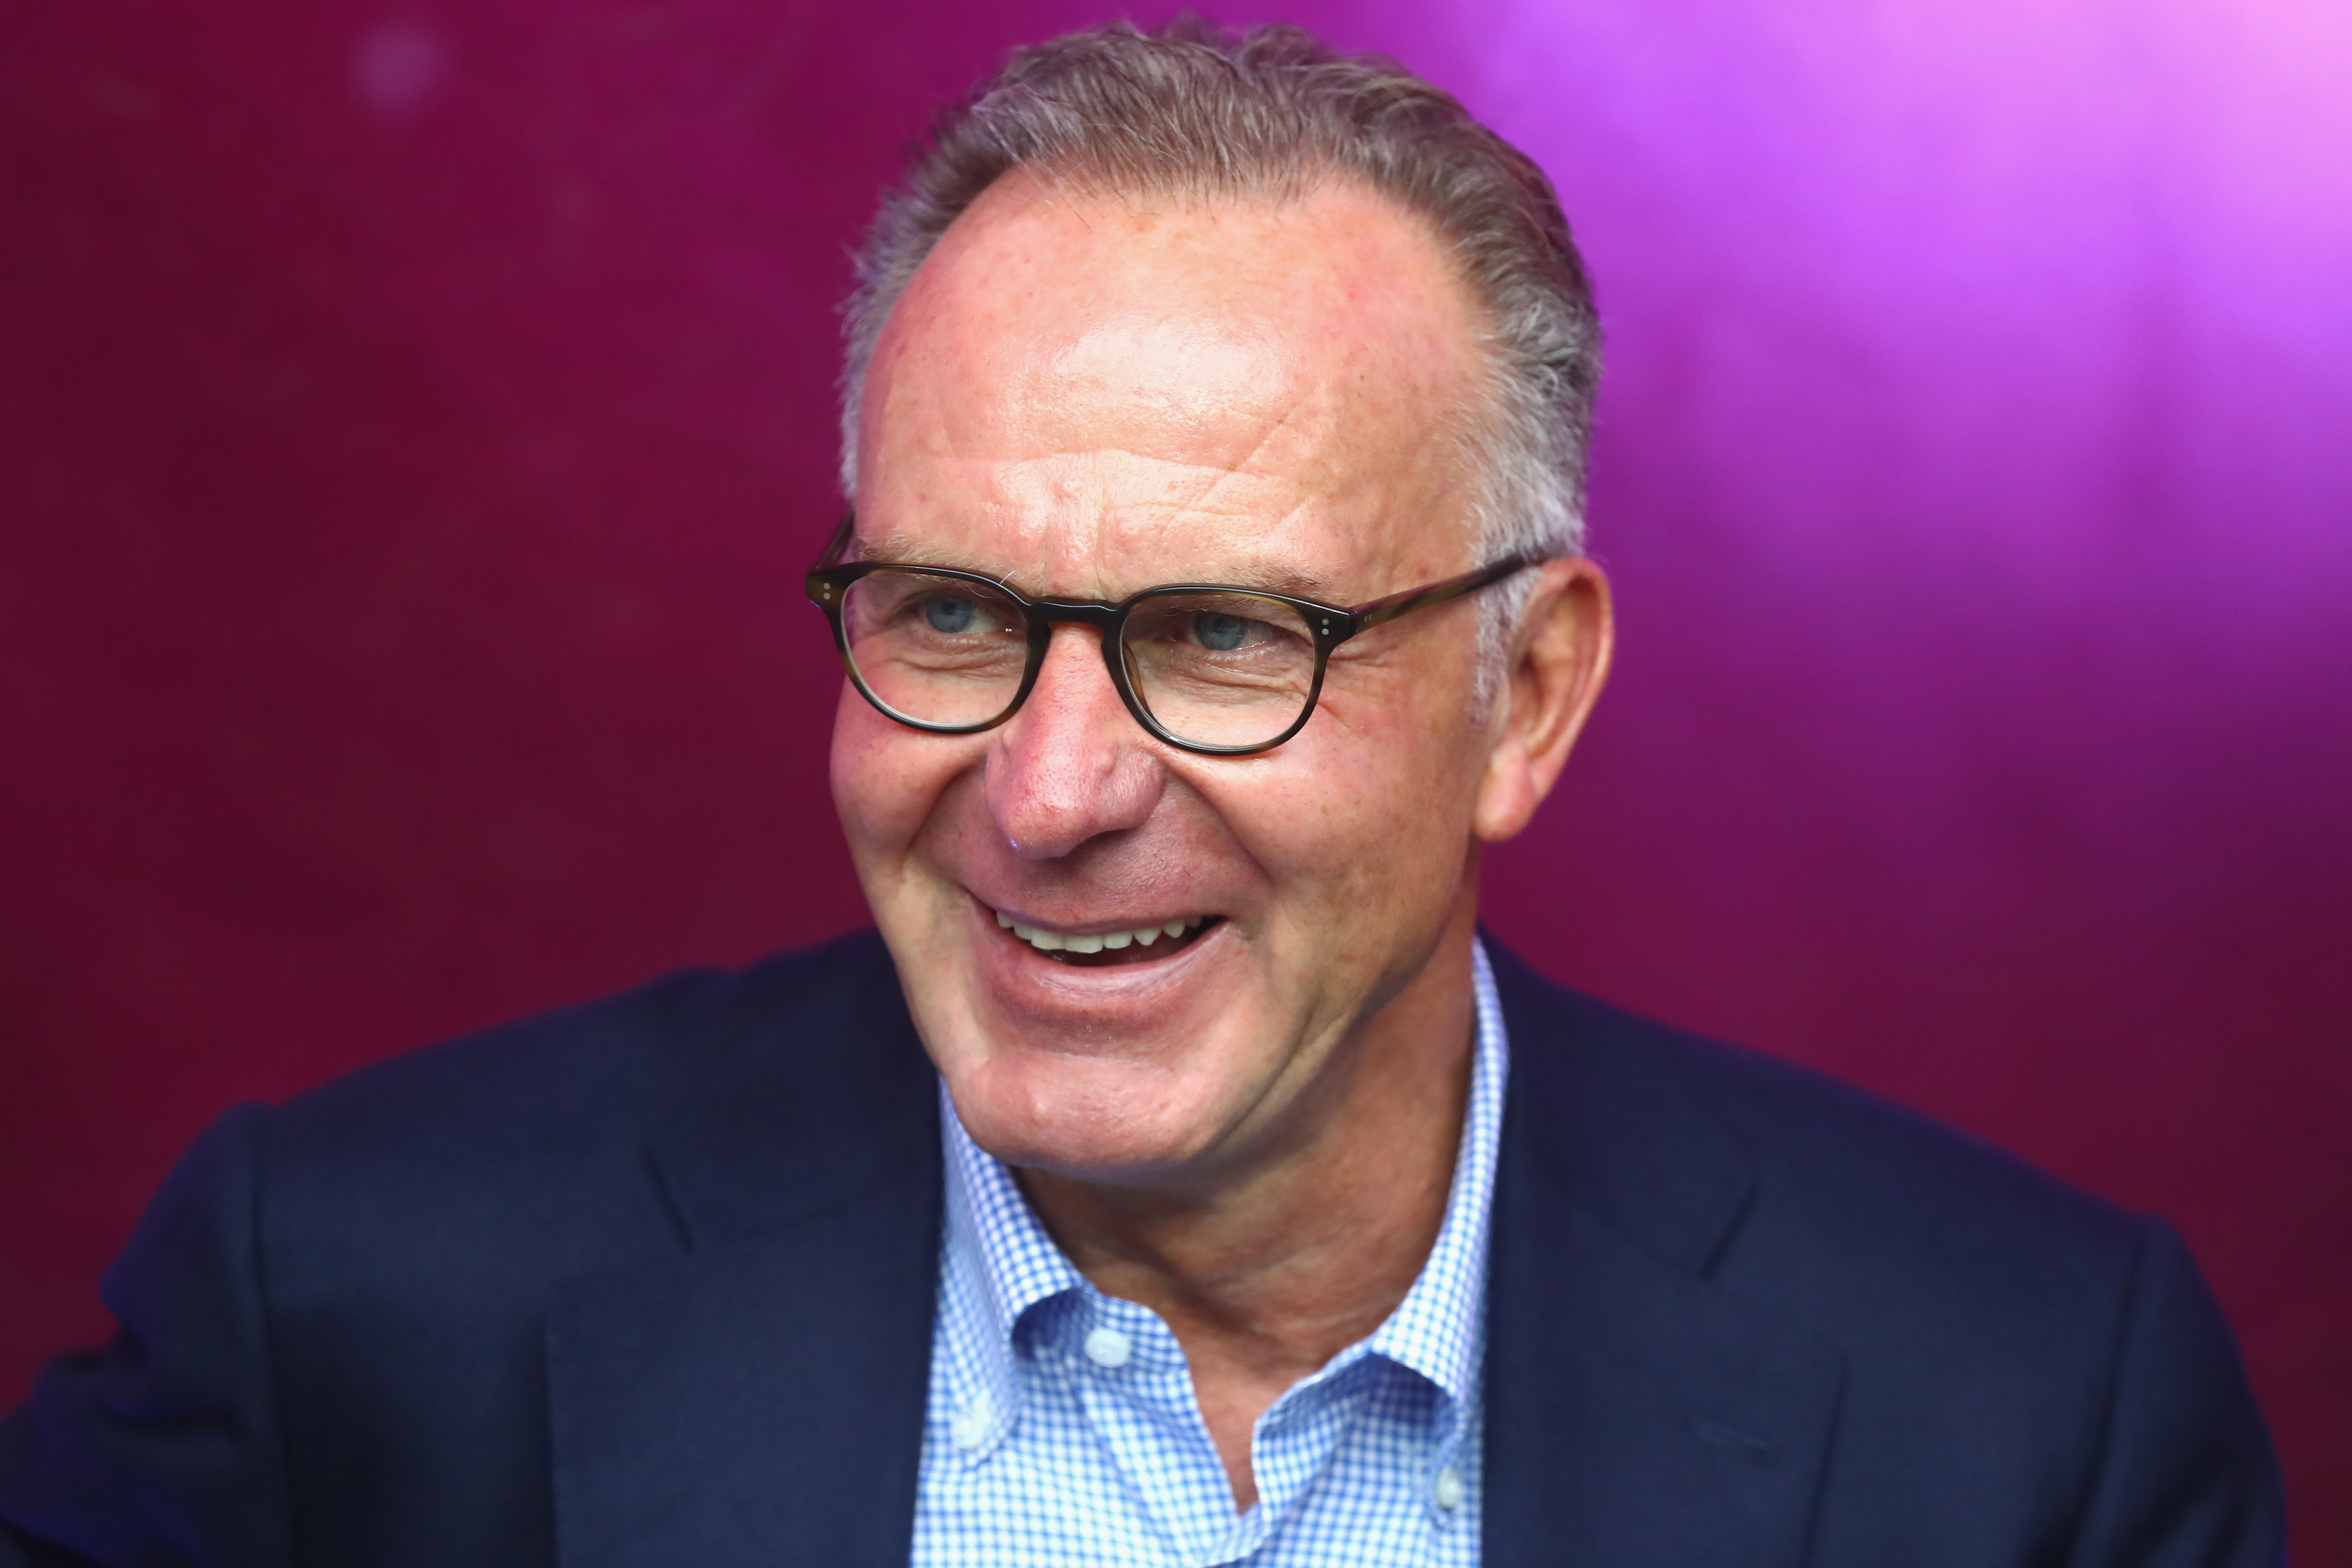 Bayern Munich CEO Rummenigge: “I Could Never Work At Juventus, My Heart Beats For Inter”